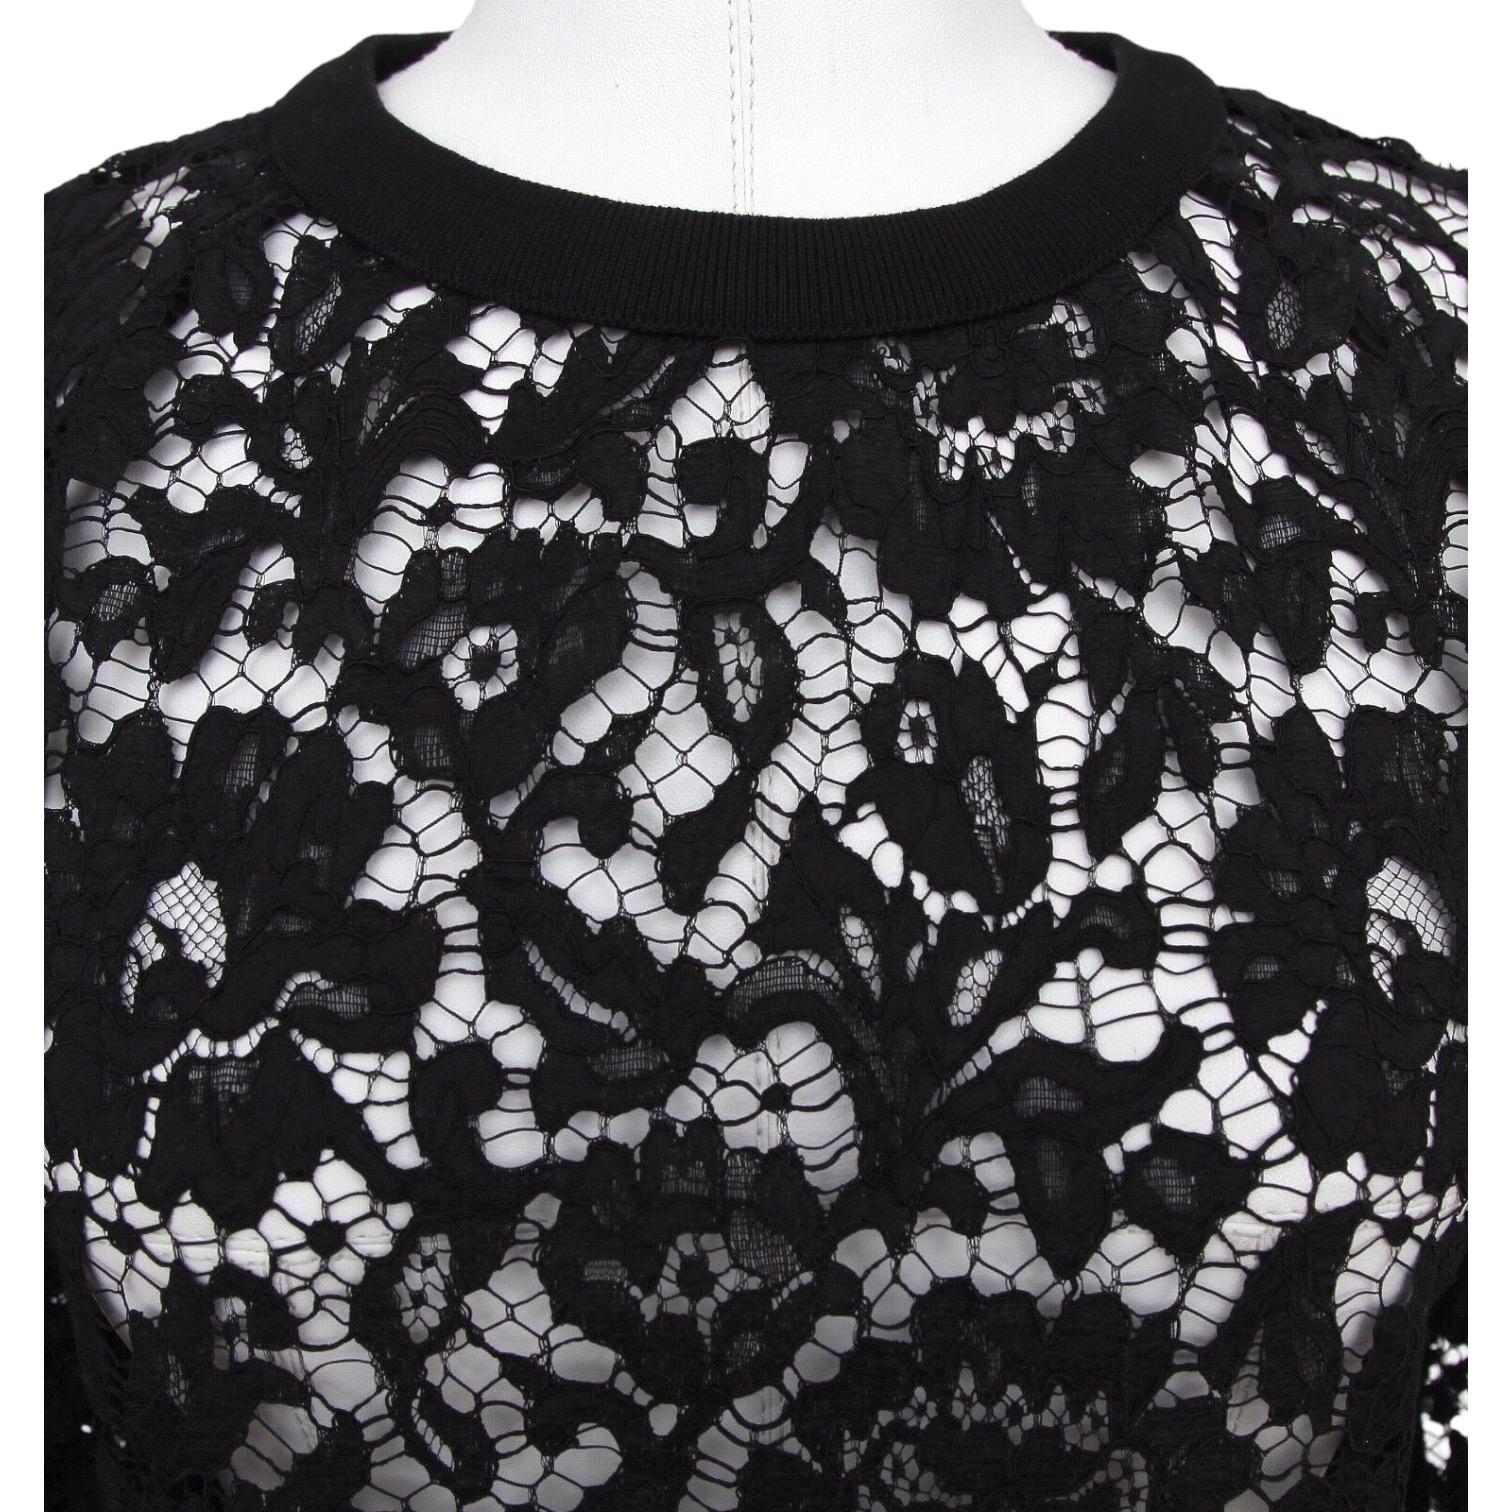 Women's VALENTINO Floral Lace Blouse Top Shirt Long Sleeve Black White Sz S BNWT For Sale